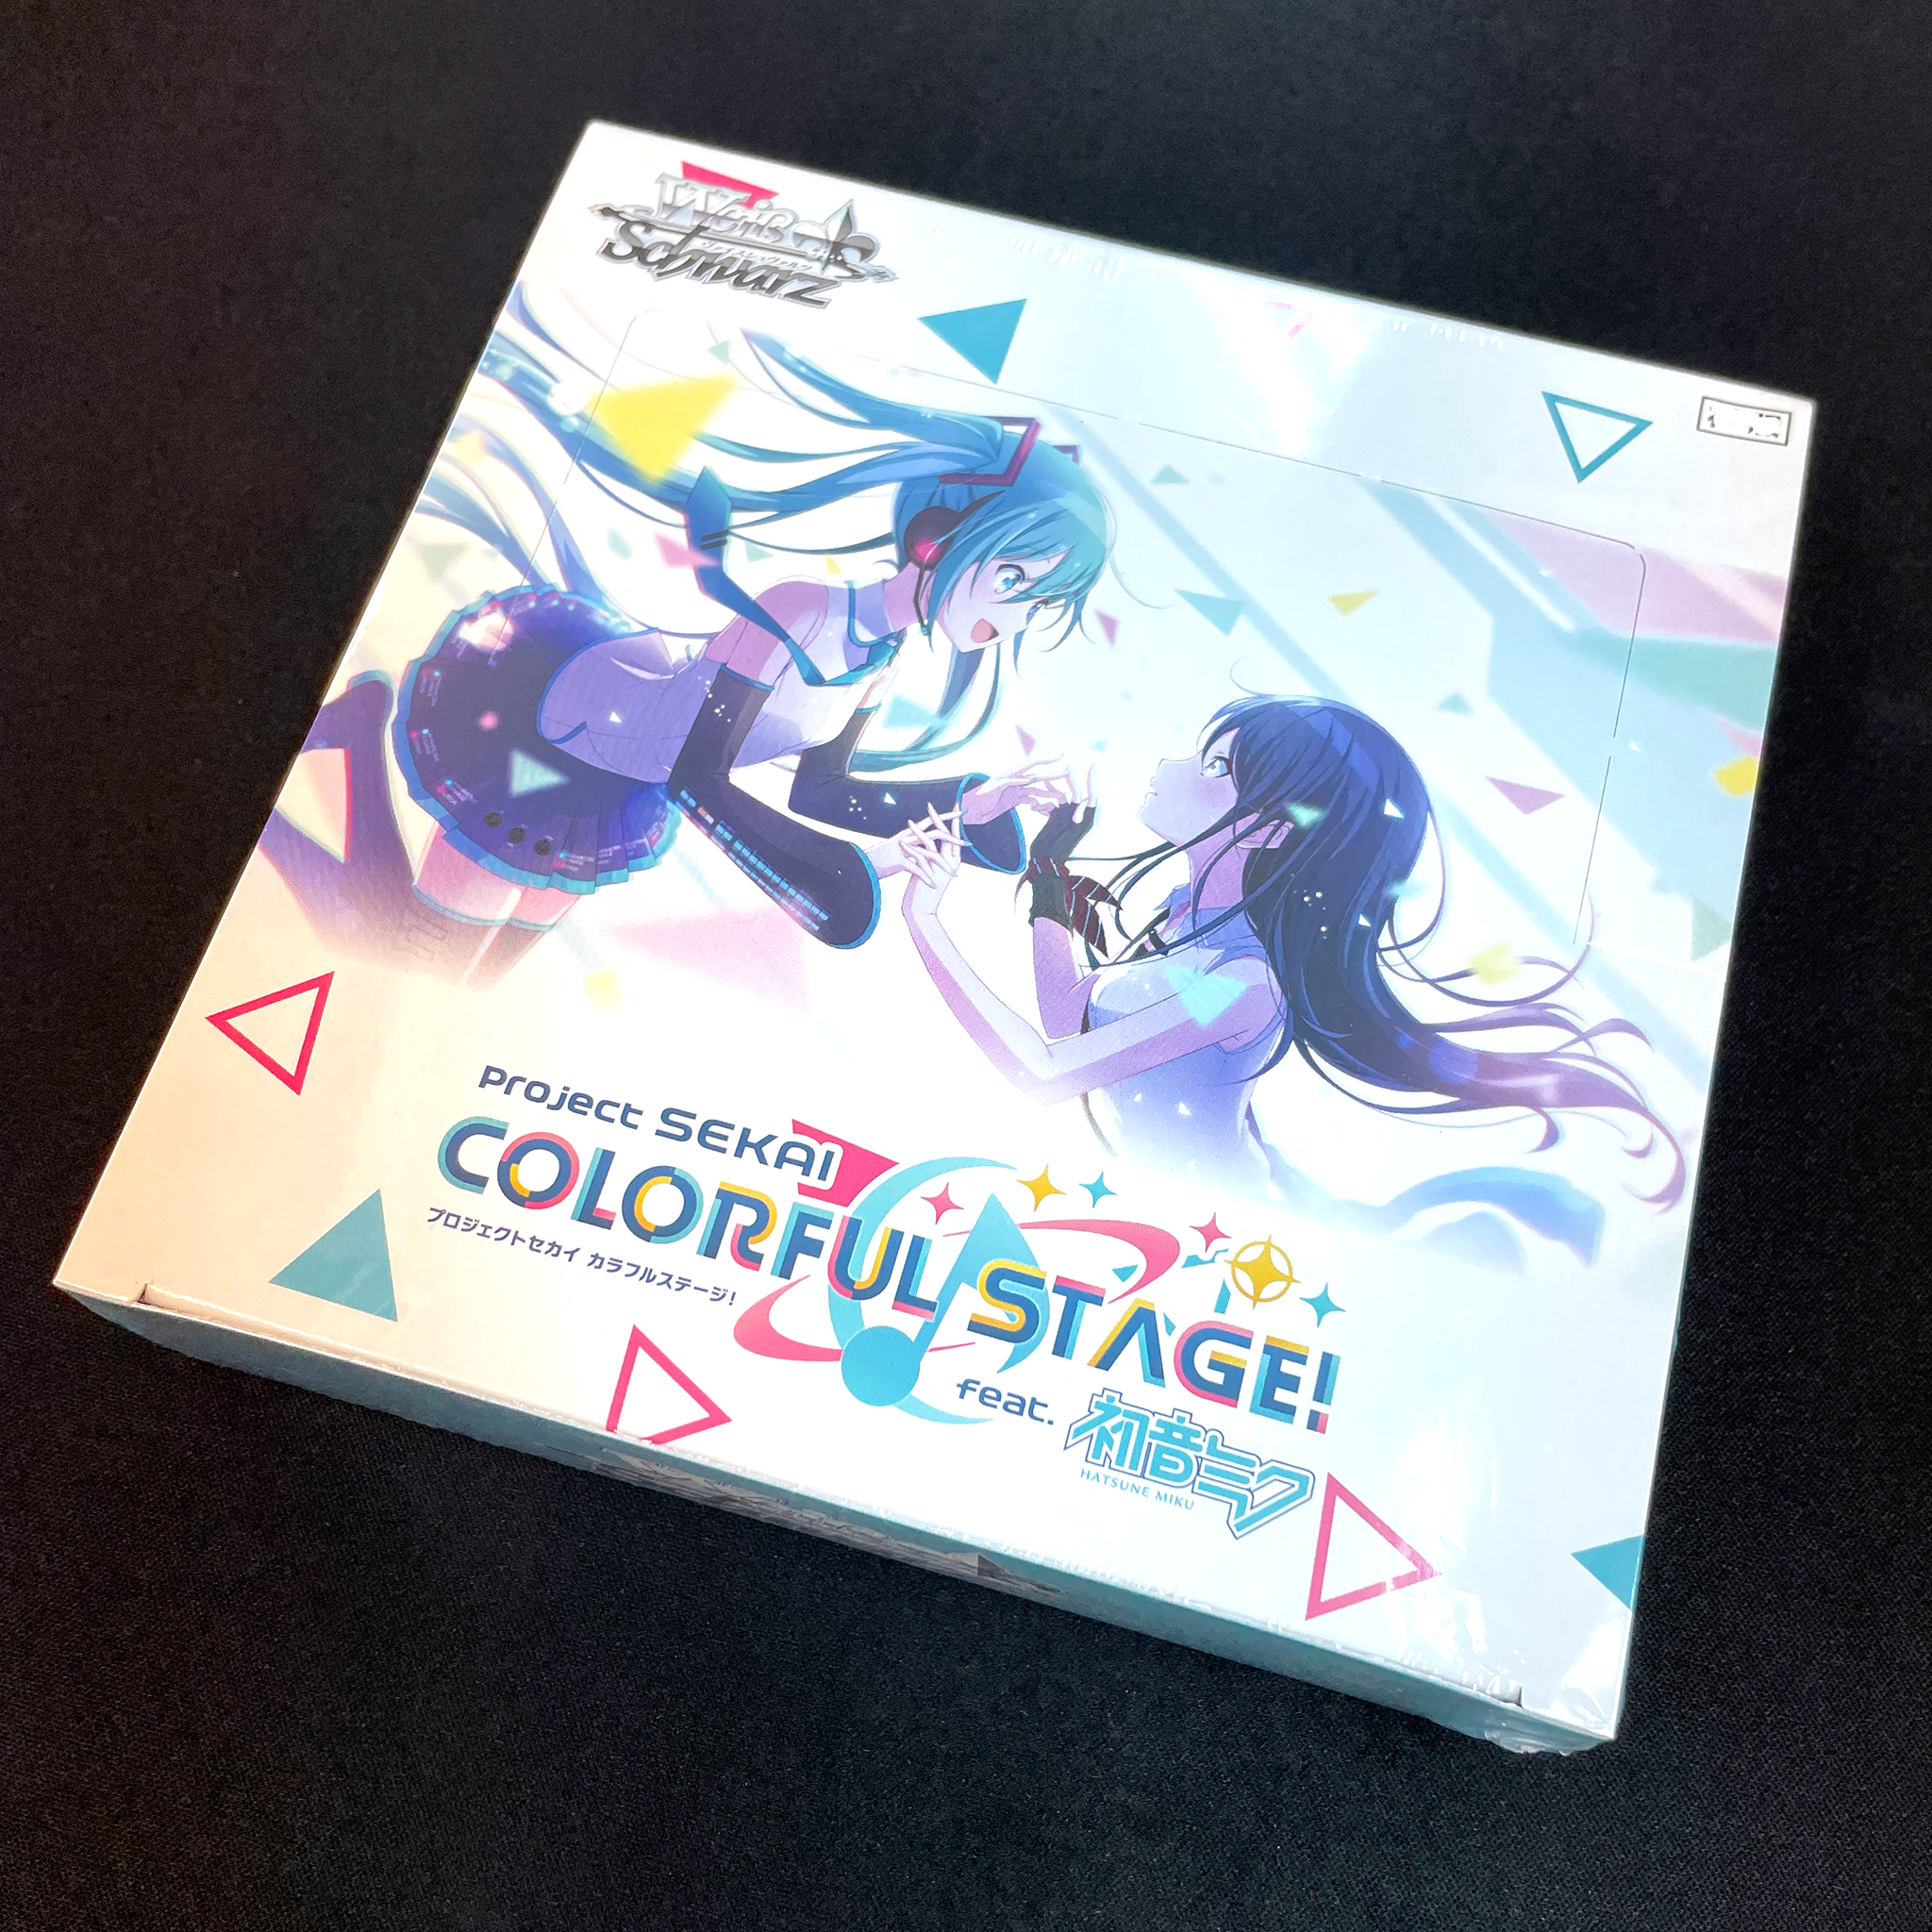 Weiß Schwarz Booster pack Project Sekai Colorful Stage! feat. Hatsune Miku